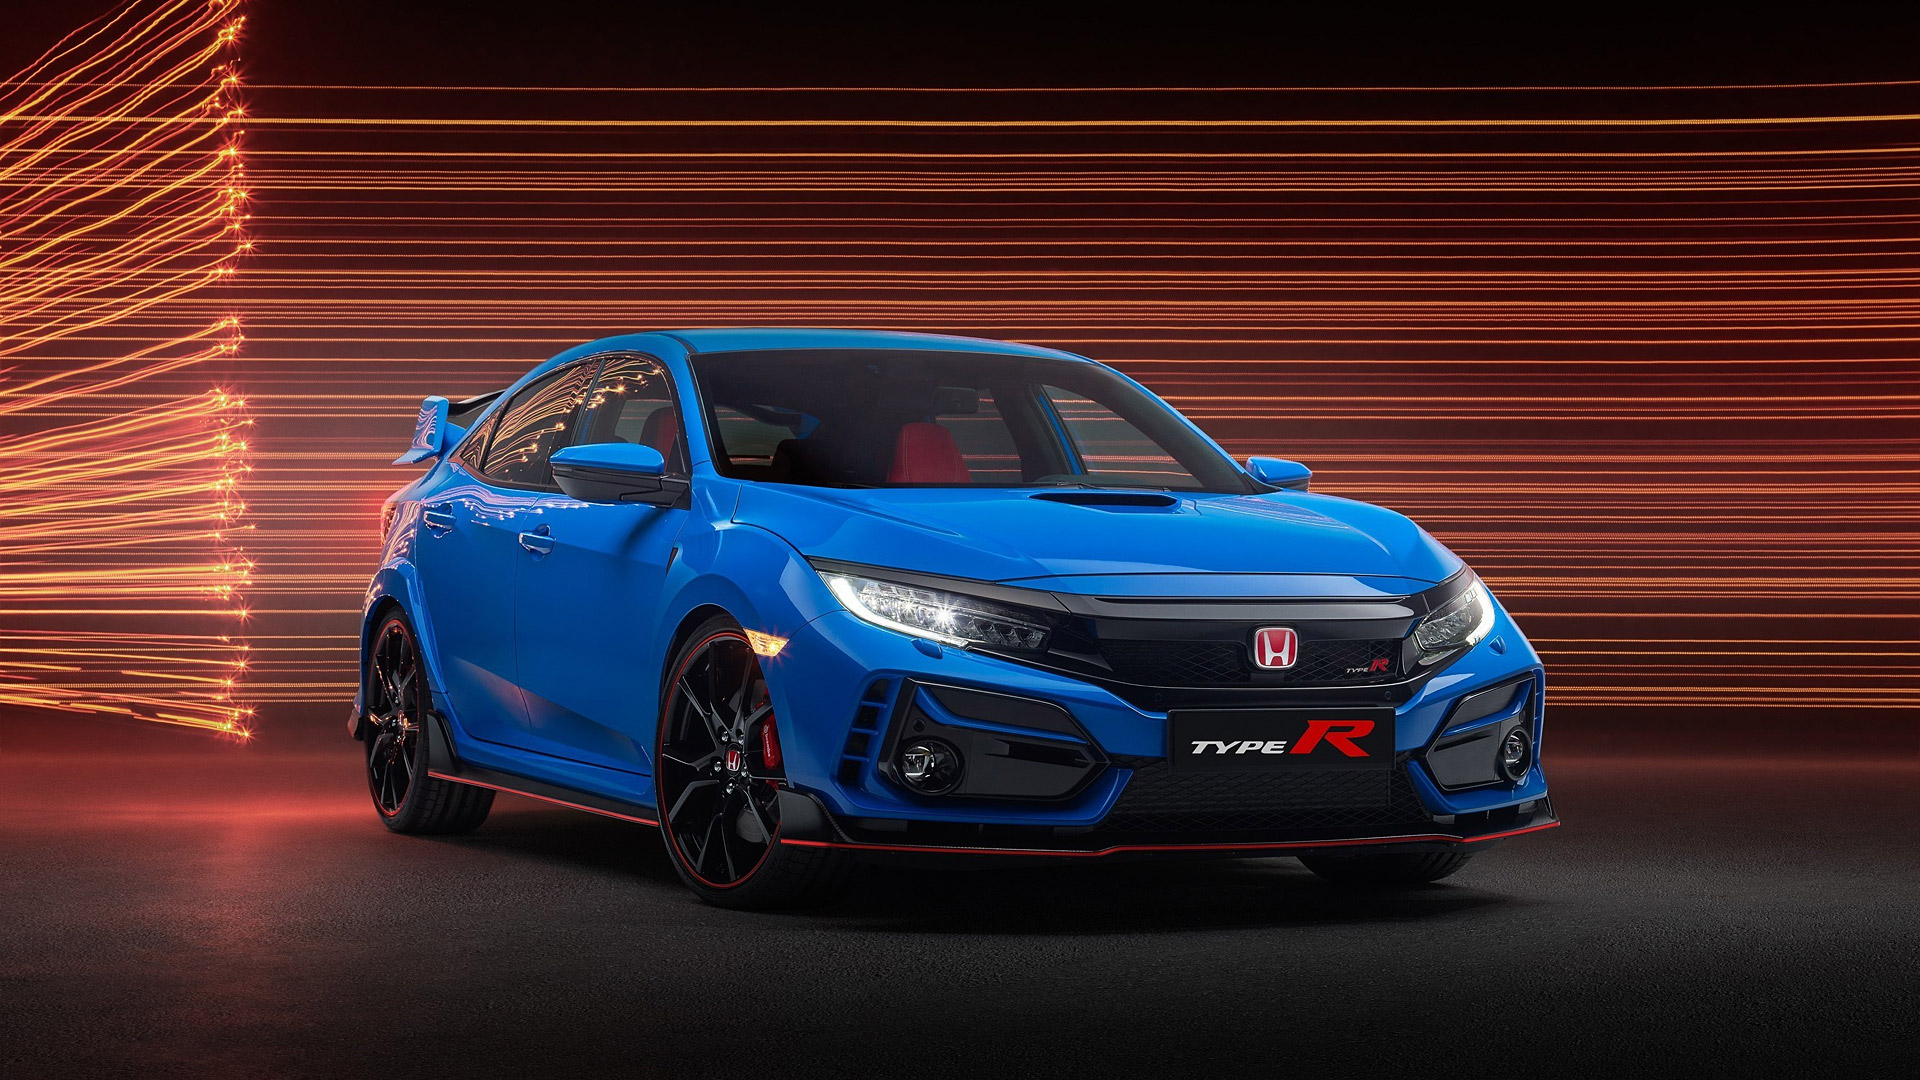 Top Civic Type R Wallpaper HD Book Your